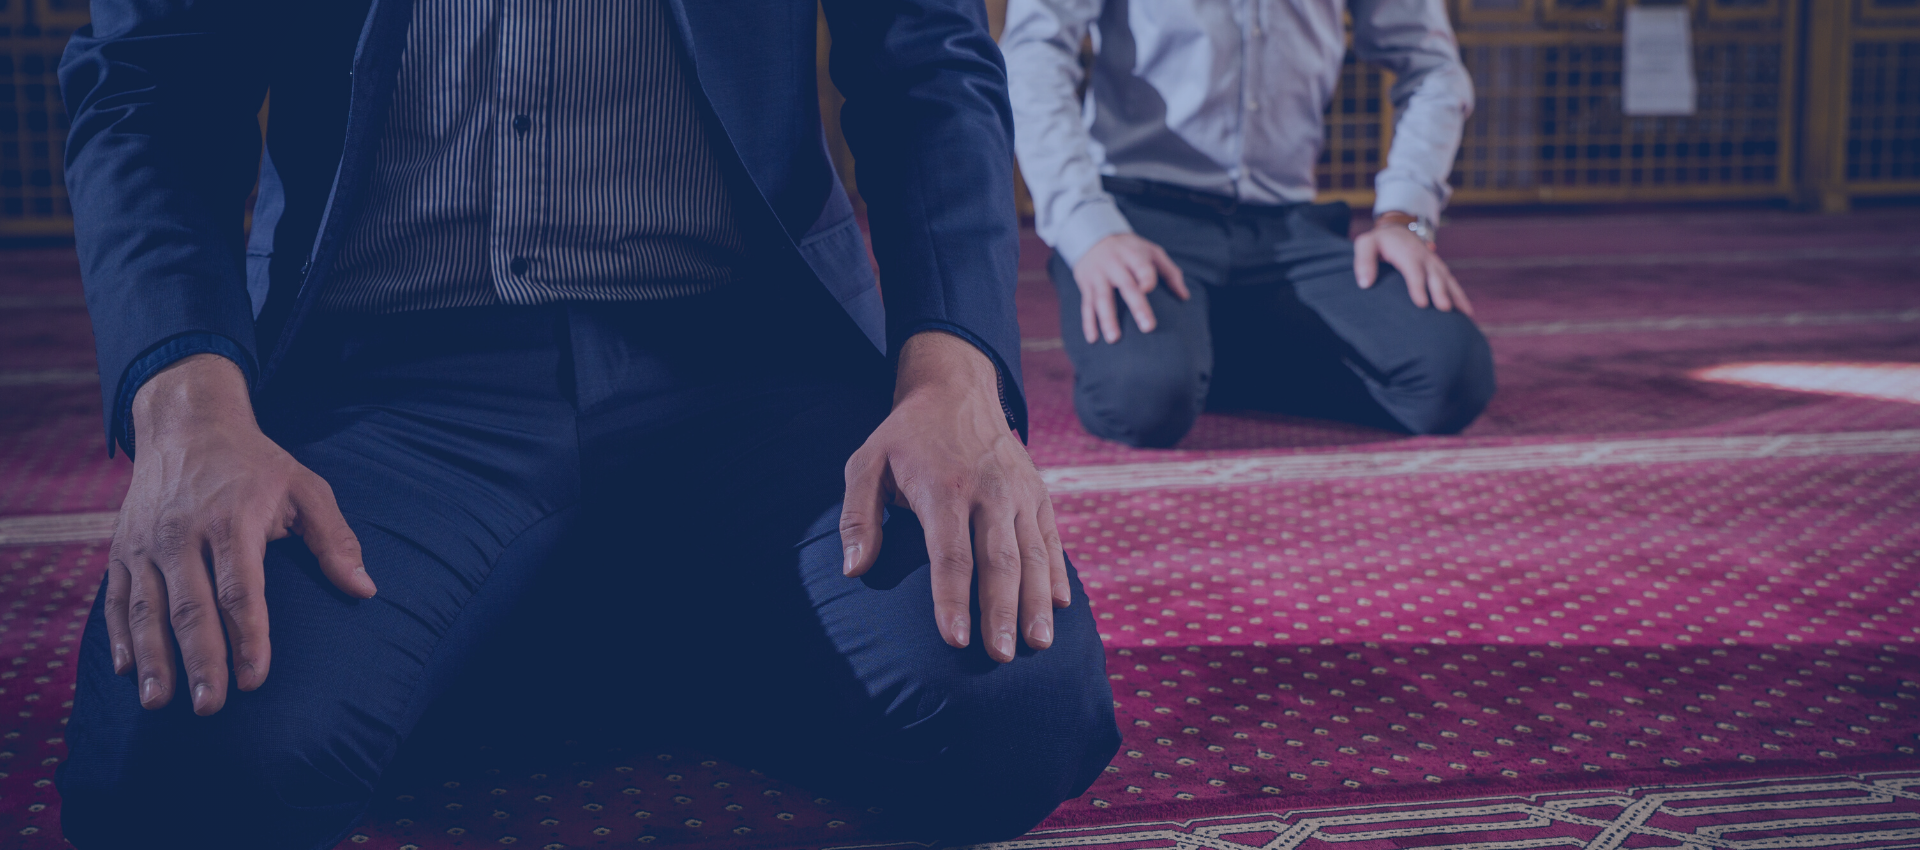 Praying in a Mosque